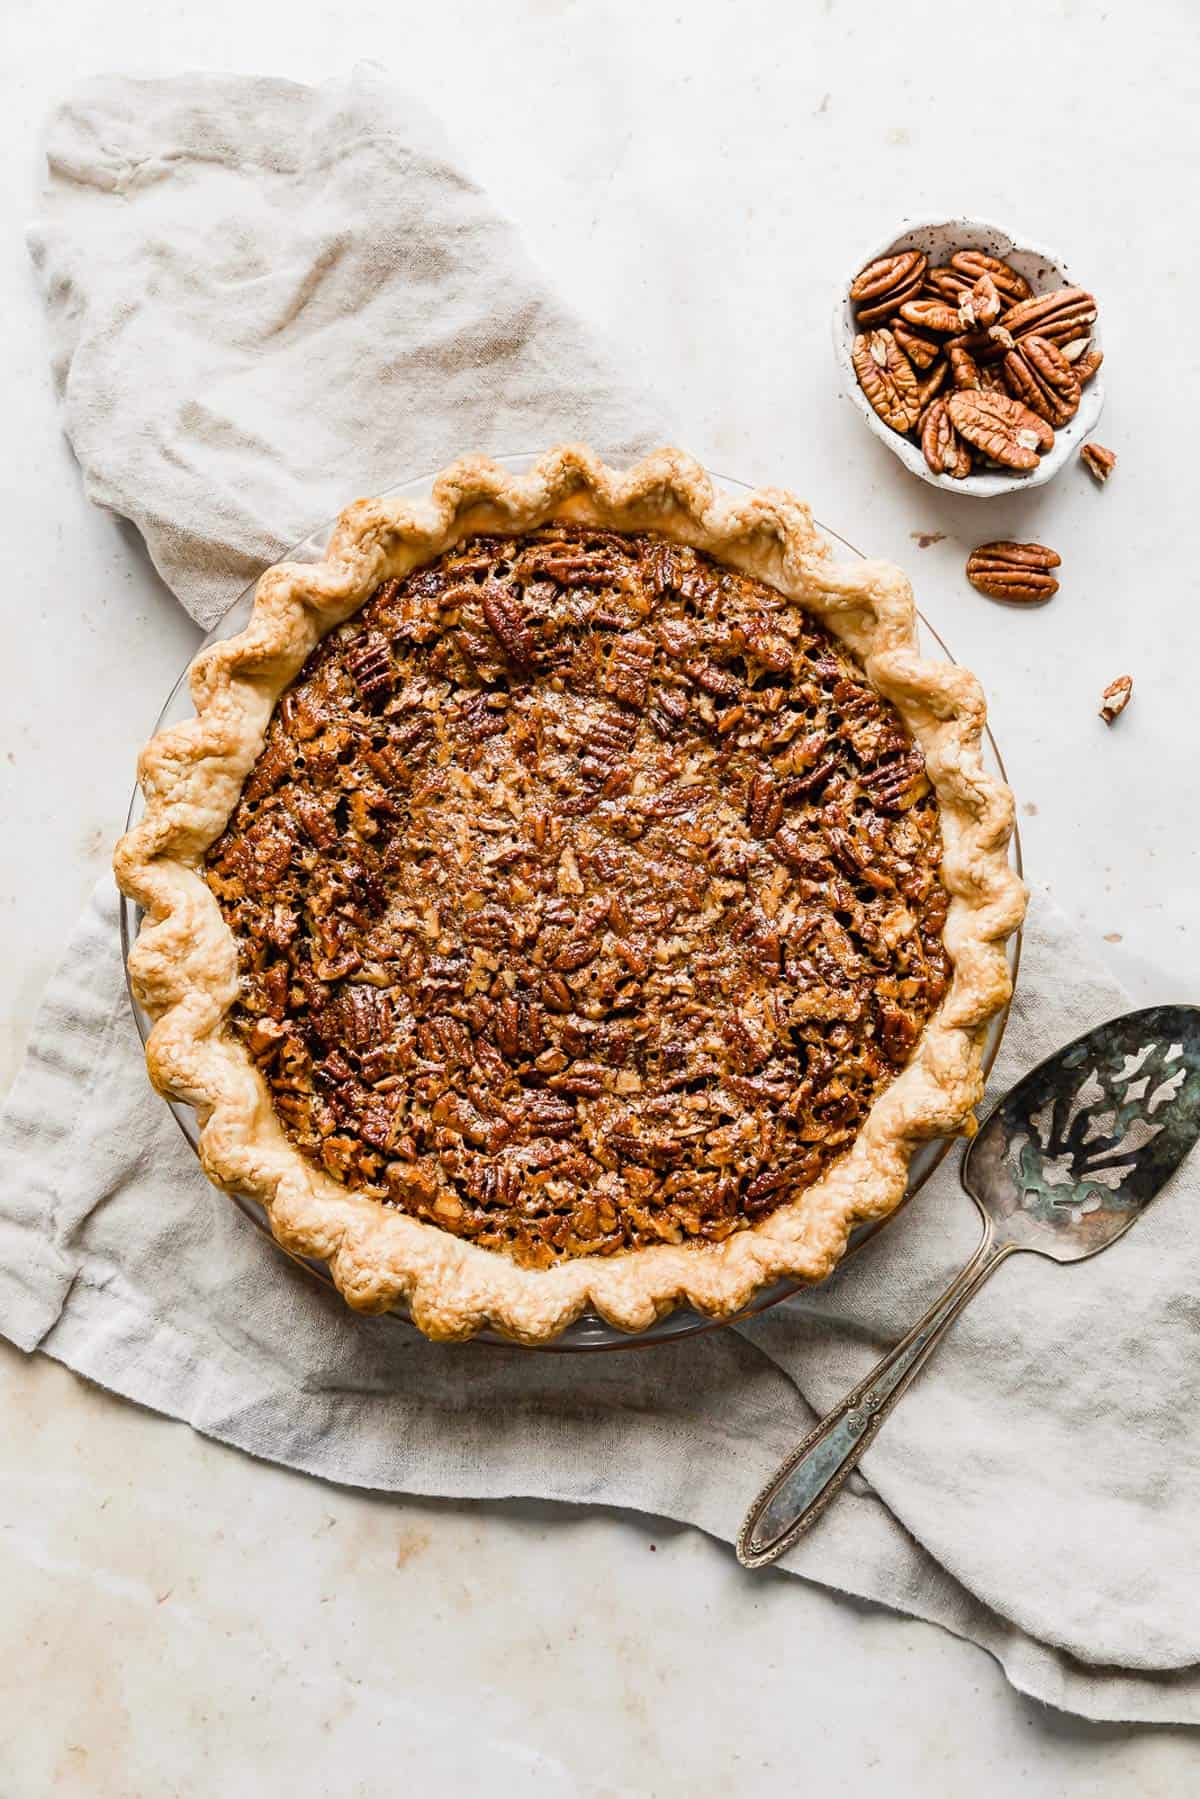 A baked Southern Pecan Pie on a tan colored linen. 